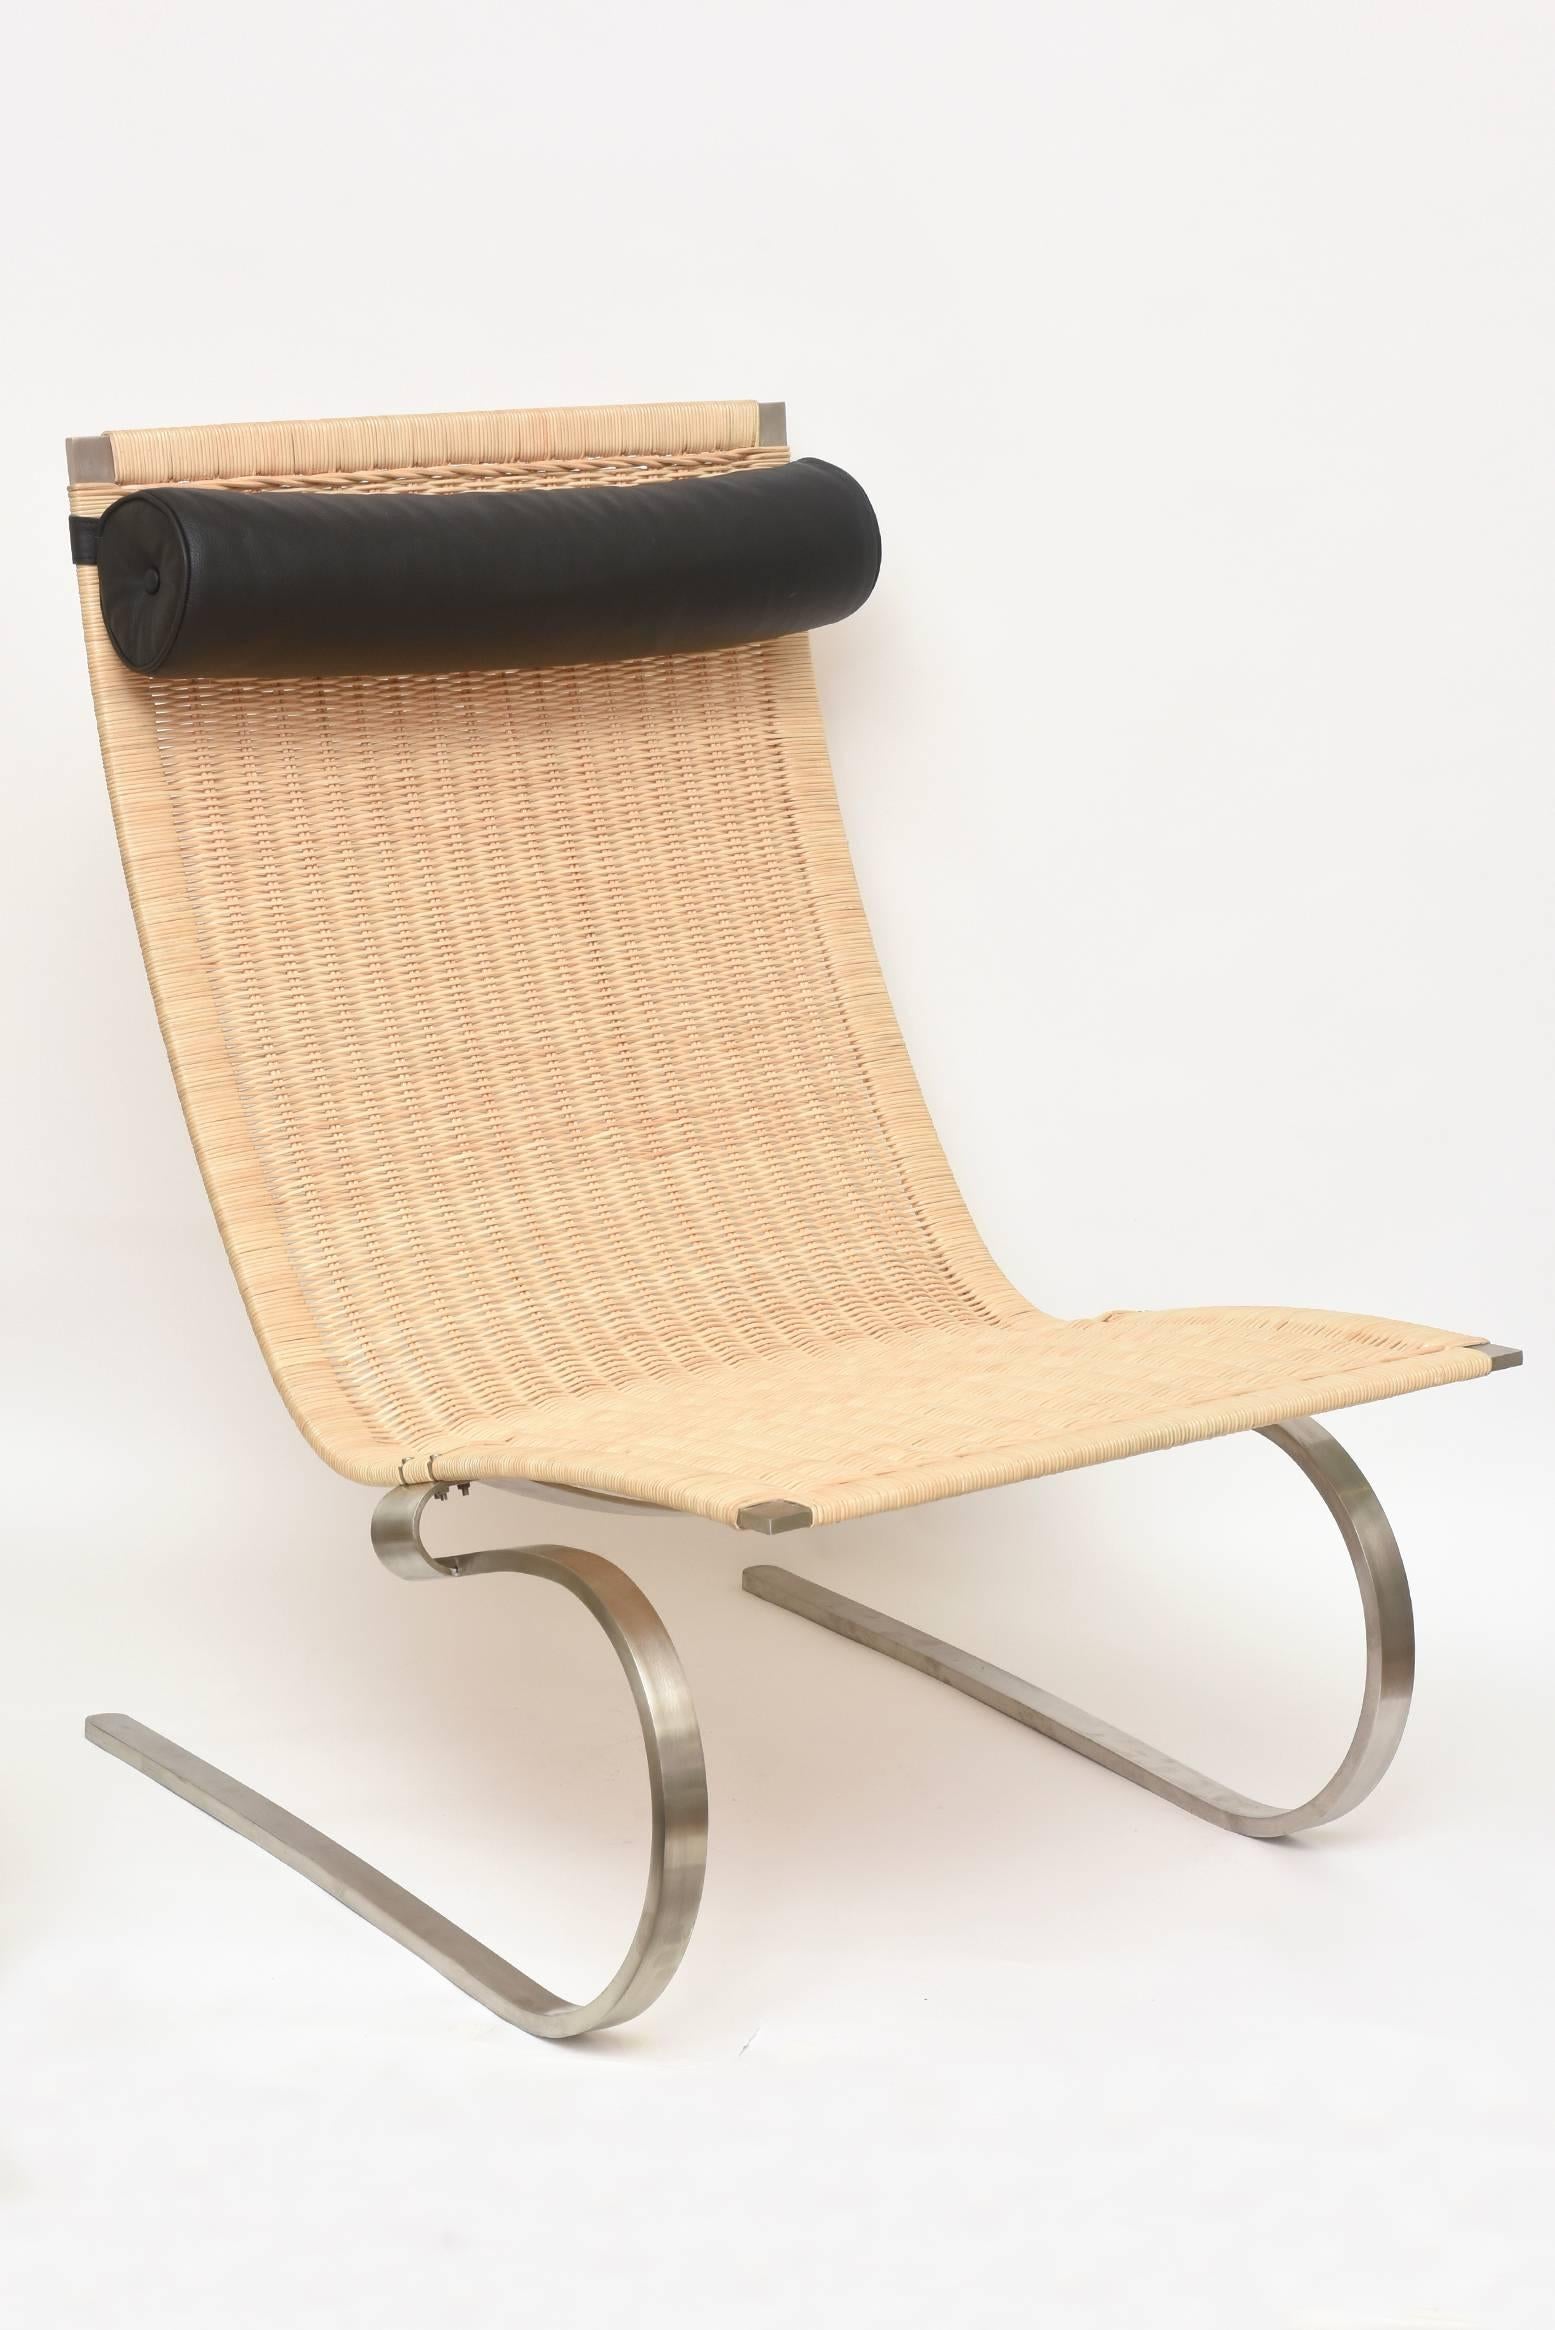 This Classic and iconic lounge chair originally designed by Poul Kjaerholm in 1967 was reissued in various formats between 1968-1980.
It is wicker cane, brushed stainless steel and has a black leather head rest bolster roll.
it was manufactured by E